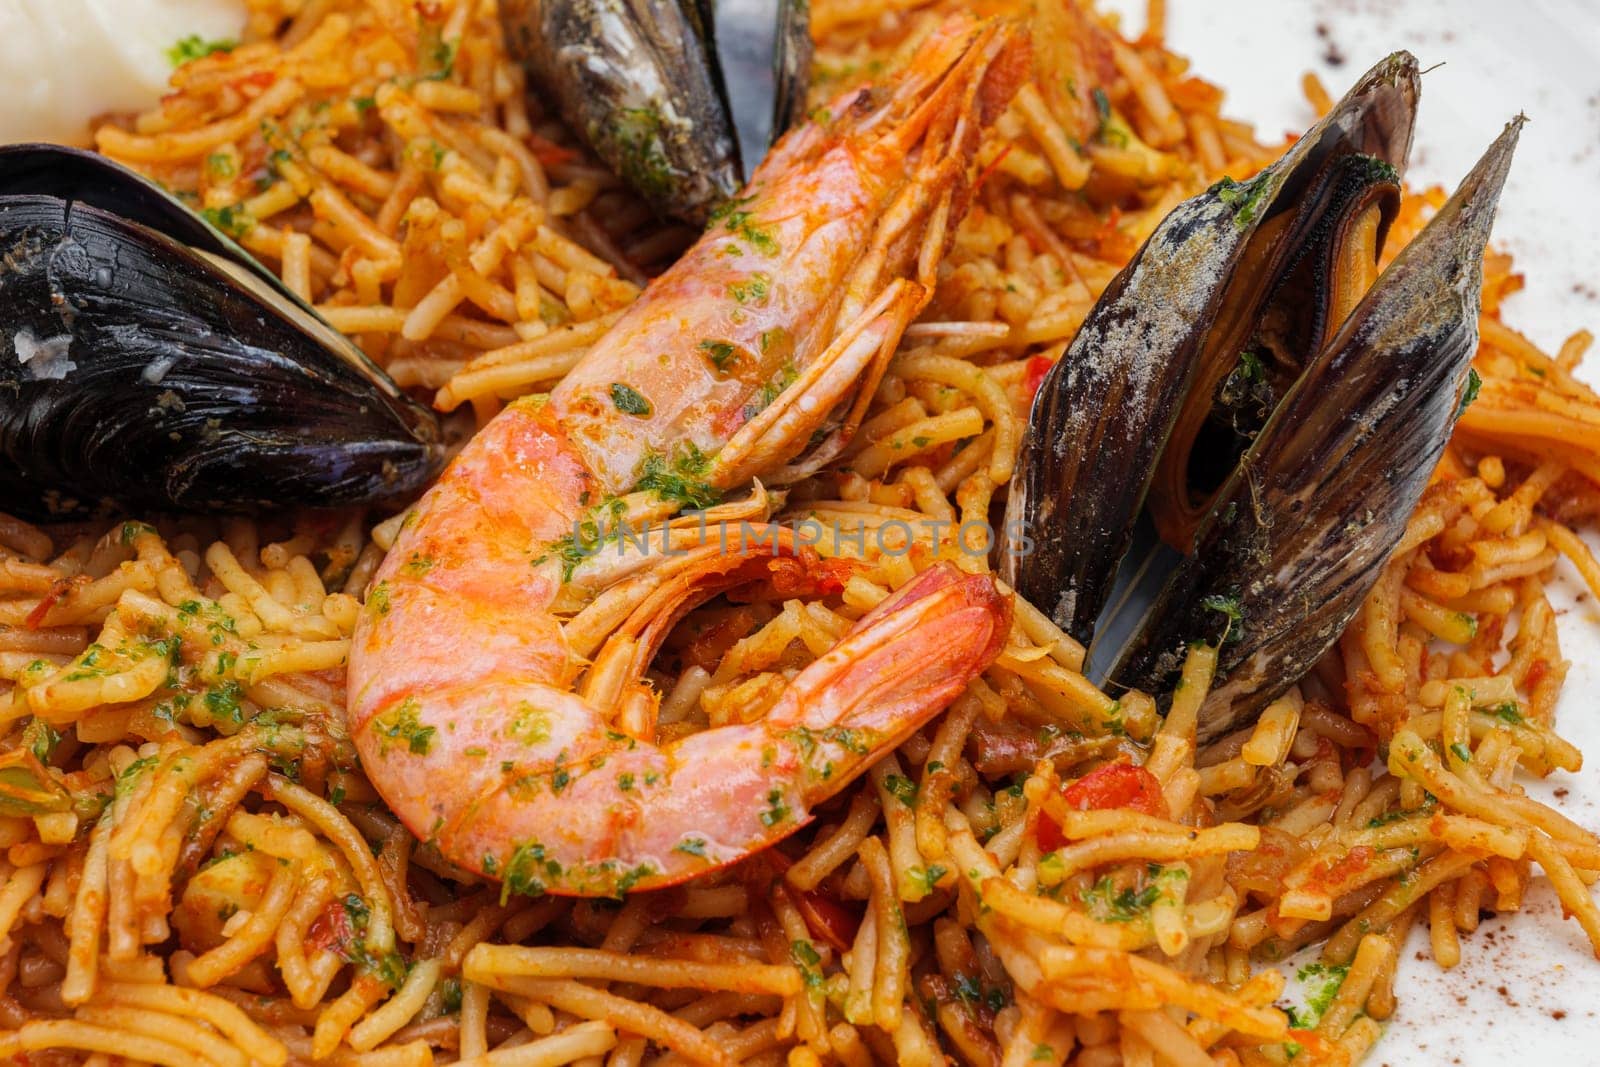 Noodles with tomato sauce and seafood, mussels and shrimps on white plate